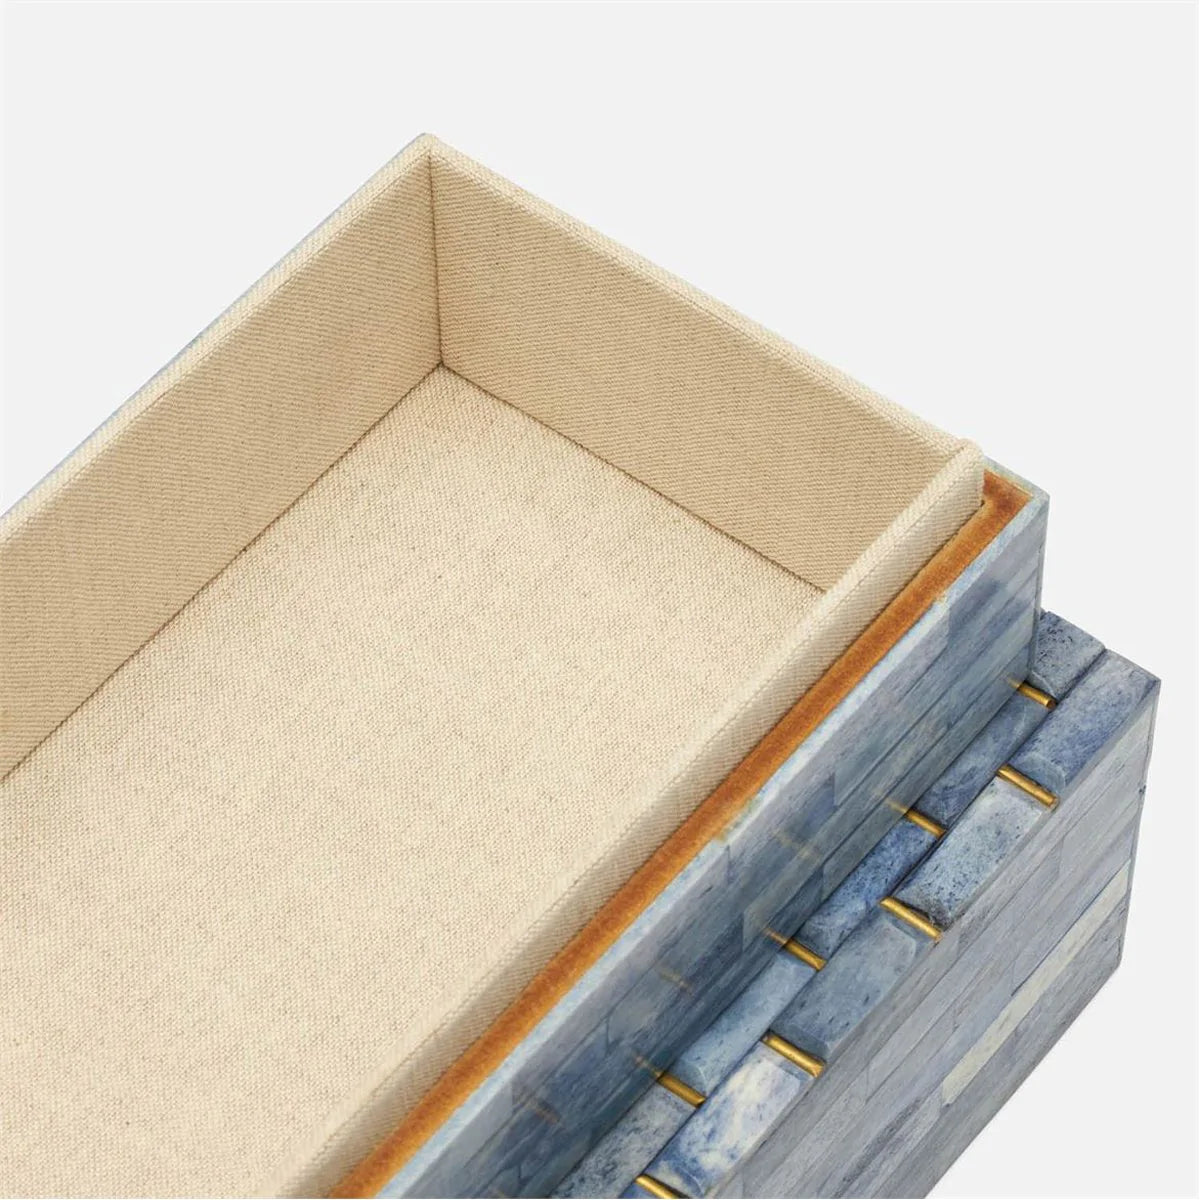 Made Goods Tage Textured Box with Brass Outline, 2-Piece Set